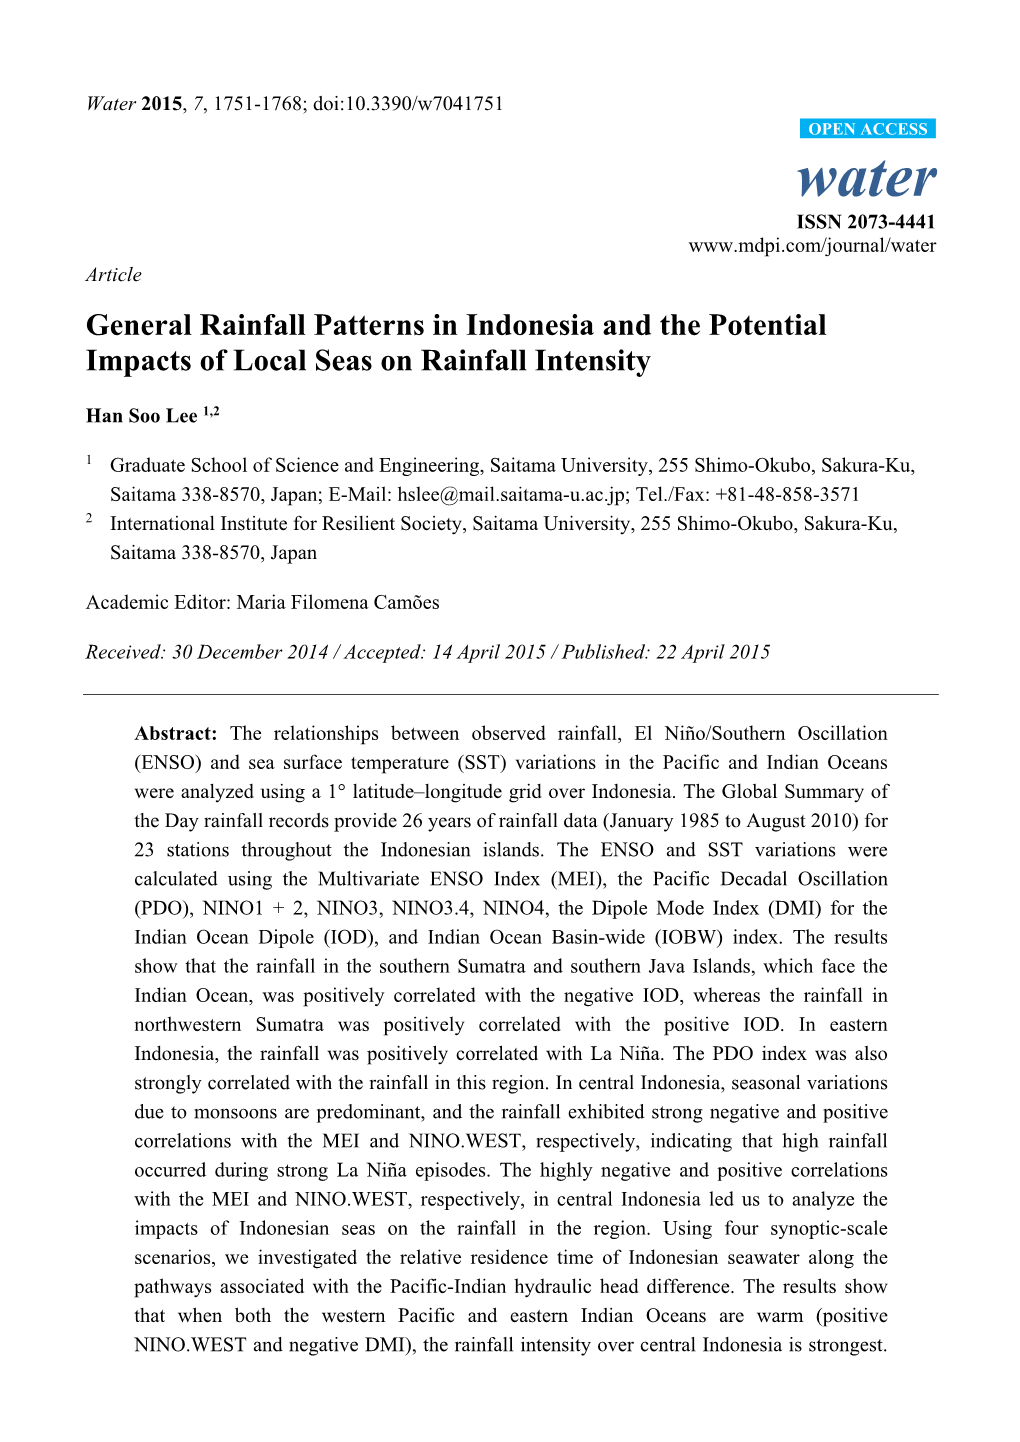 General Rainfall Patterns in Indonesia and the Potential Impacts of Local Seas on Rainfall Intensity